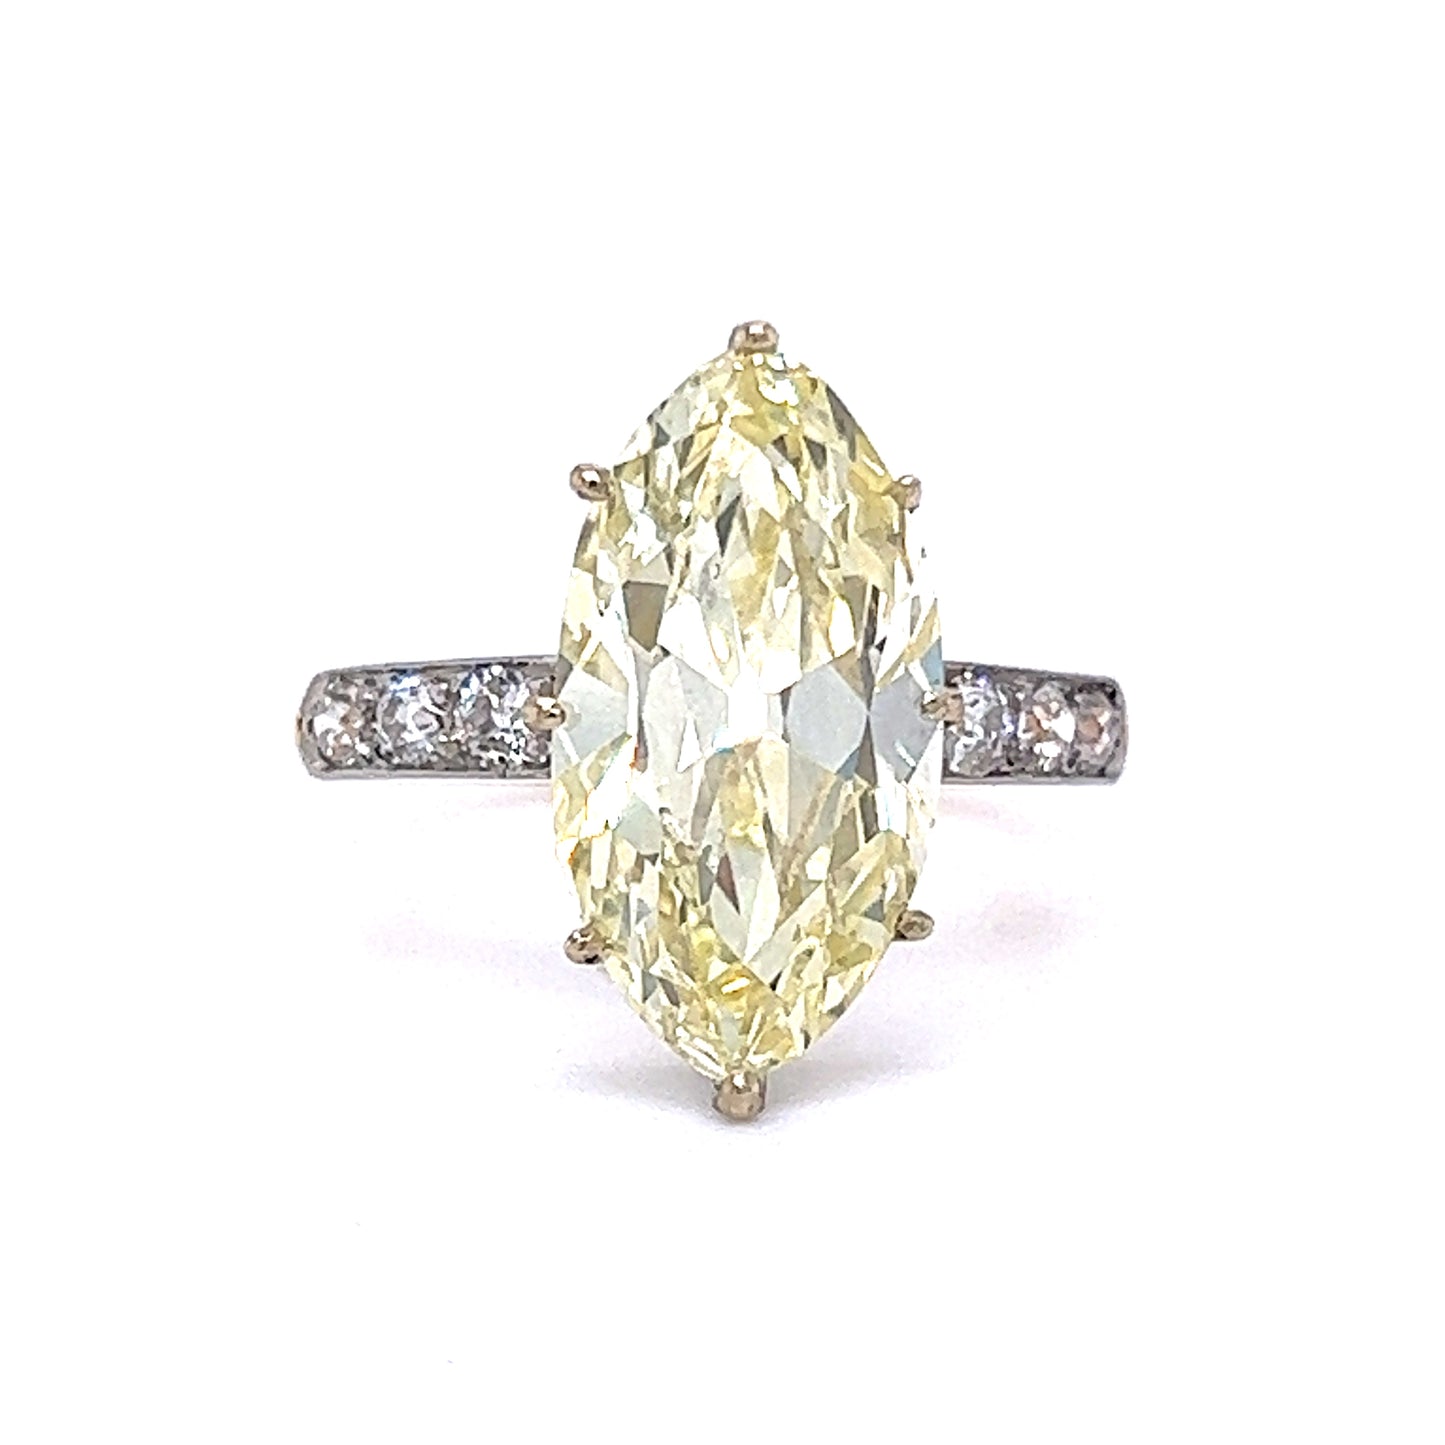 4.39 Marquise Fancy Yellow Diamond Engagement Ring in Platinum & 18k Yellow Gold